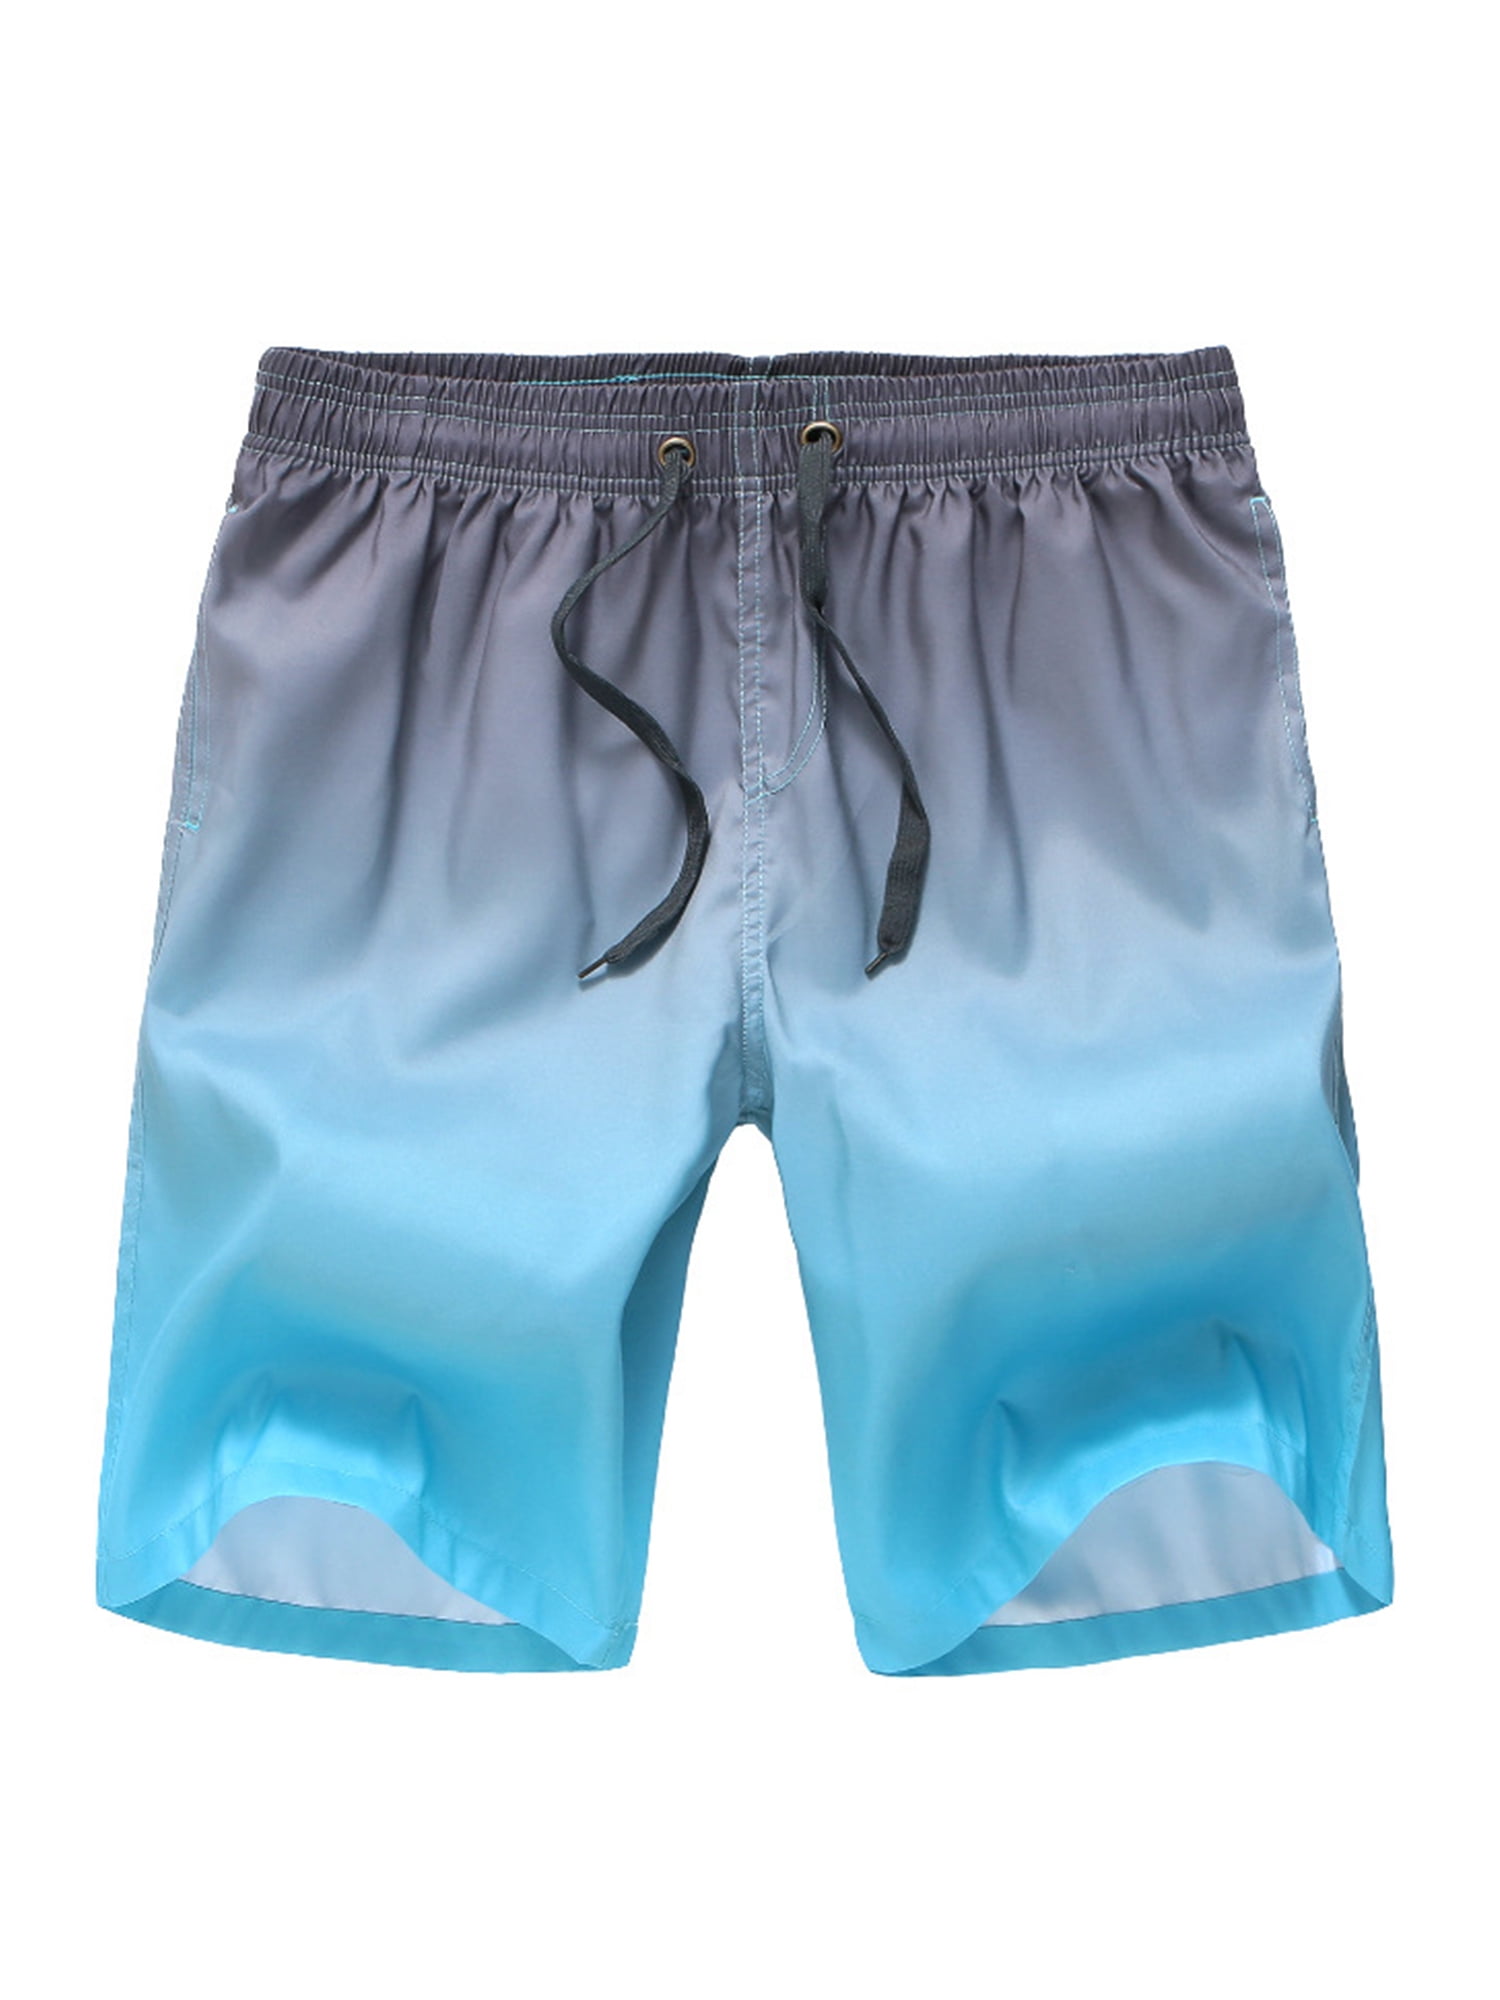 MENS SWIMMING SHORTS CASUAL SUMMER HOLIDAY BEACH GYM SPORTS SWIM CONTRAST TRUNKS 